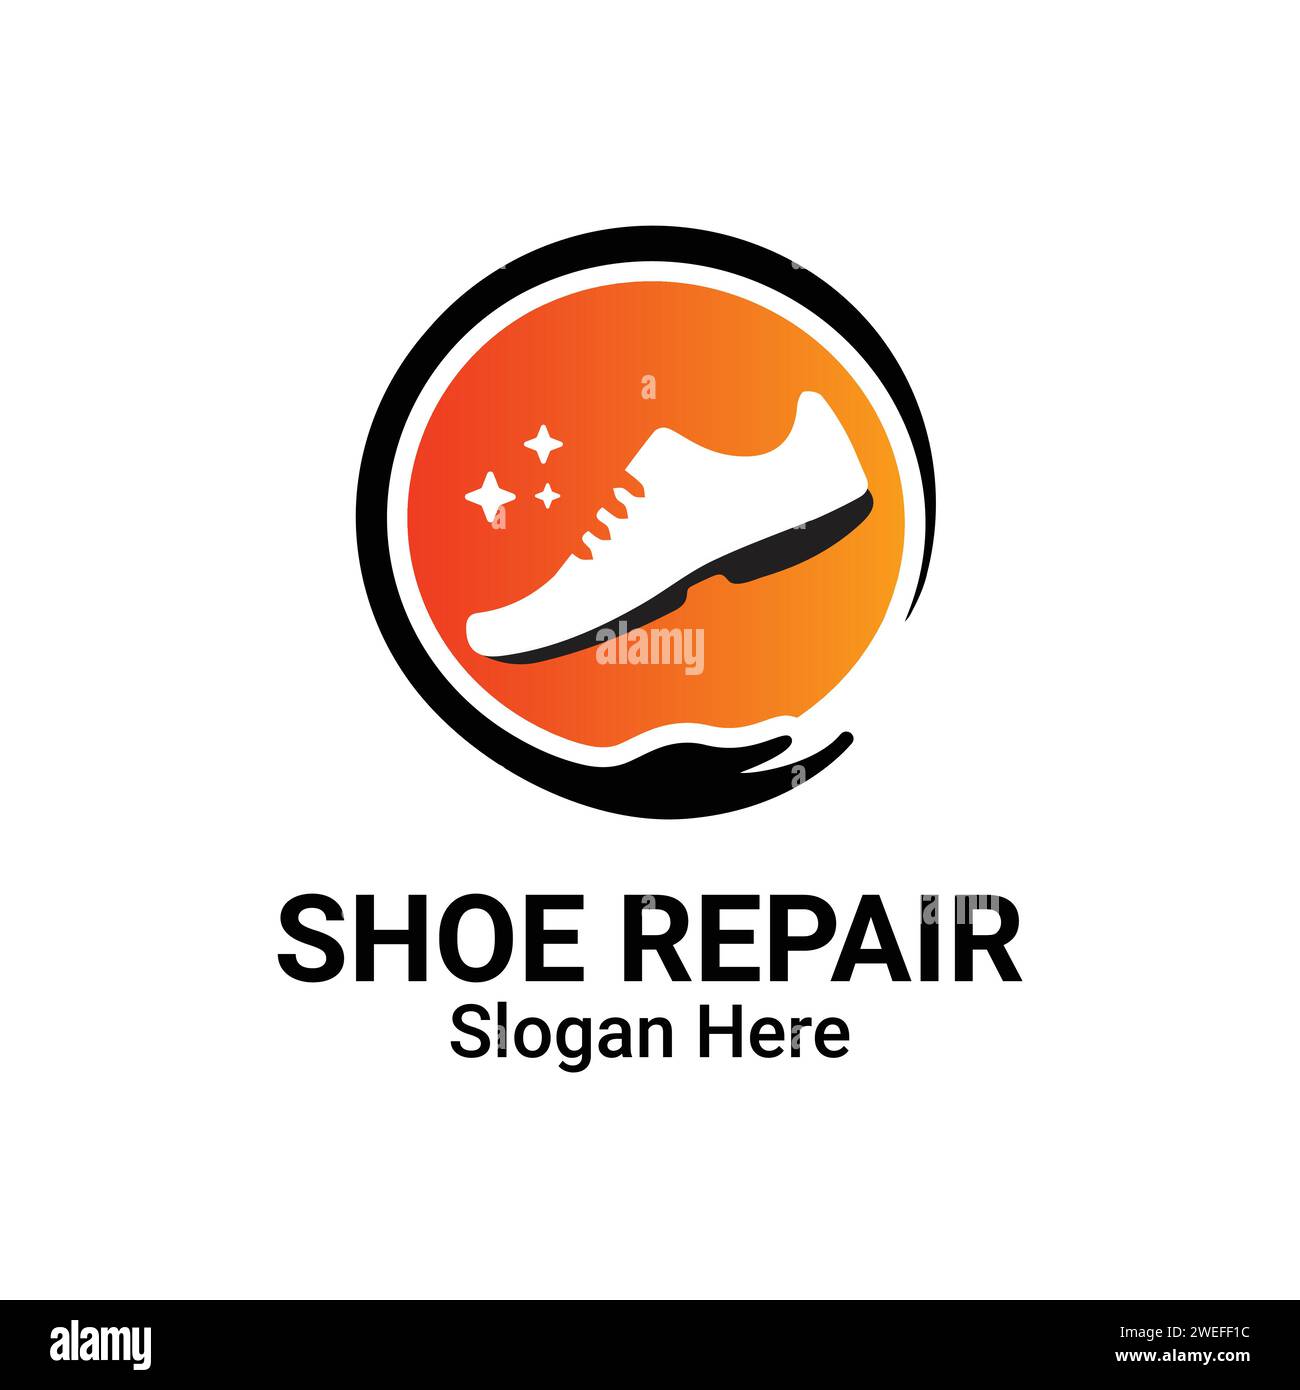 Shoe Repair Logo Service. Fix Shoes Vector Template. Trendy concept for workshop repair or restoration of leather goods. Stock Vector